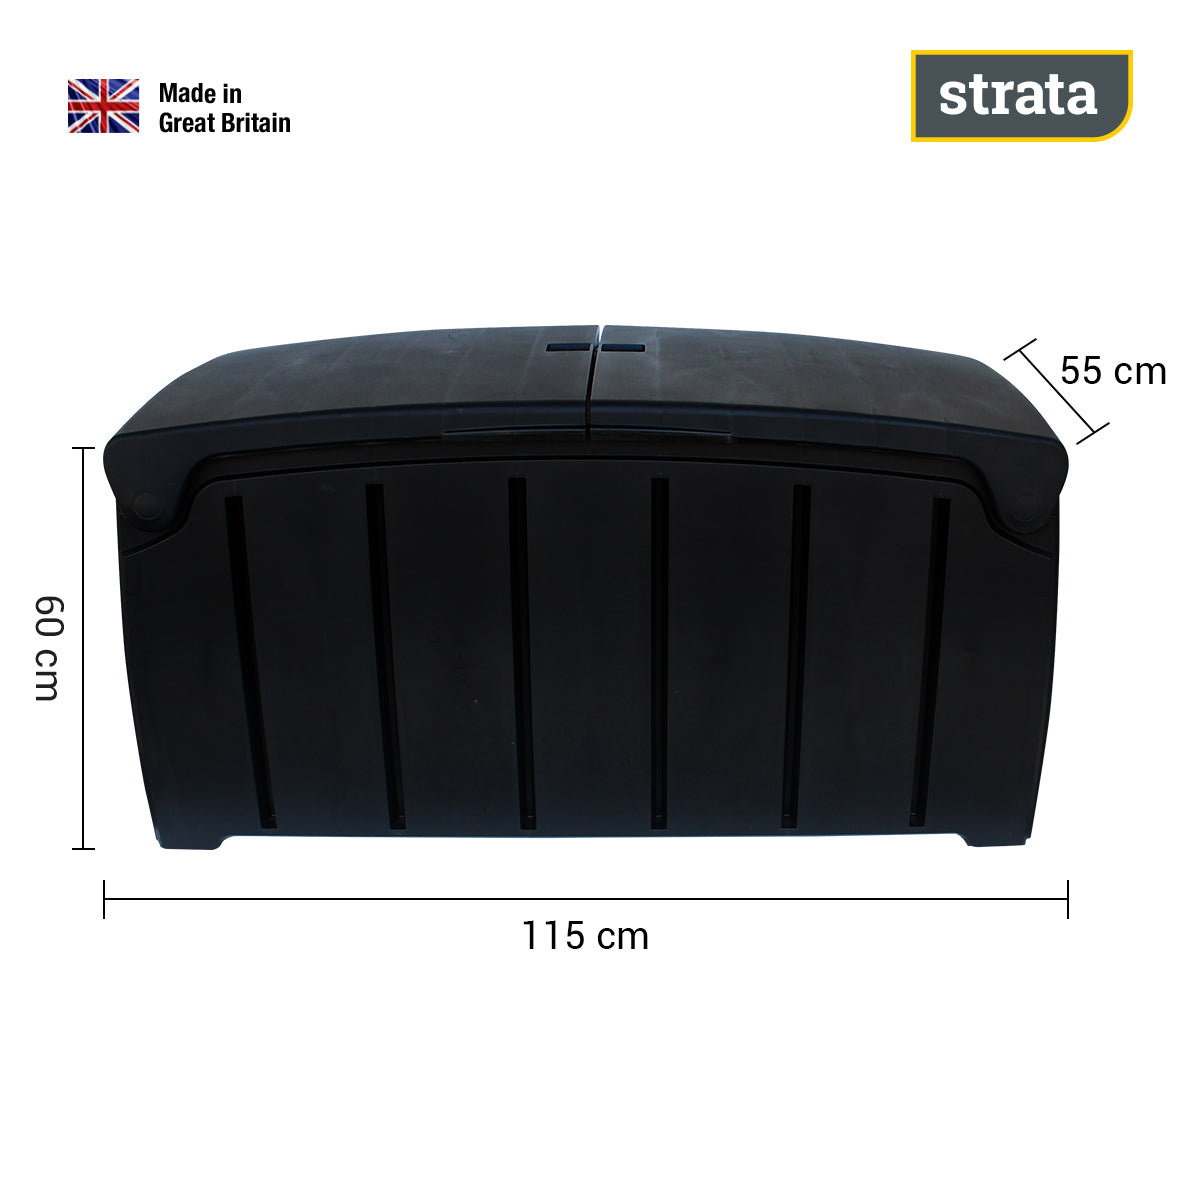 Easy armed garden storage trunk box 322 liters and 480 kilos of cargo Strata GN220